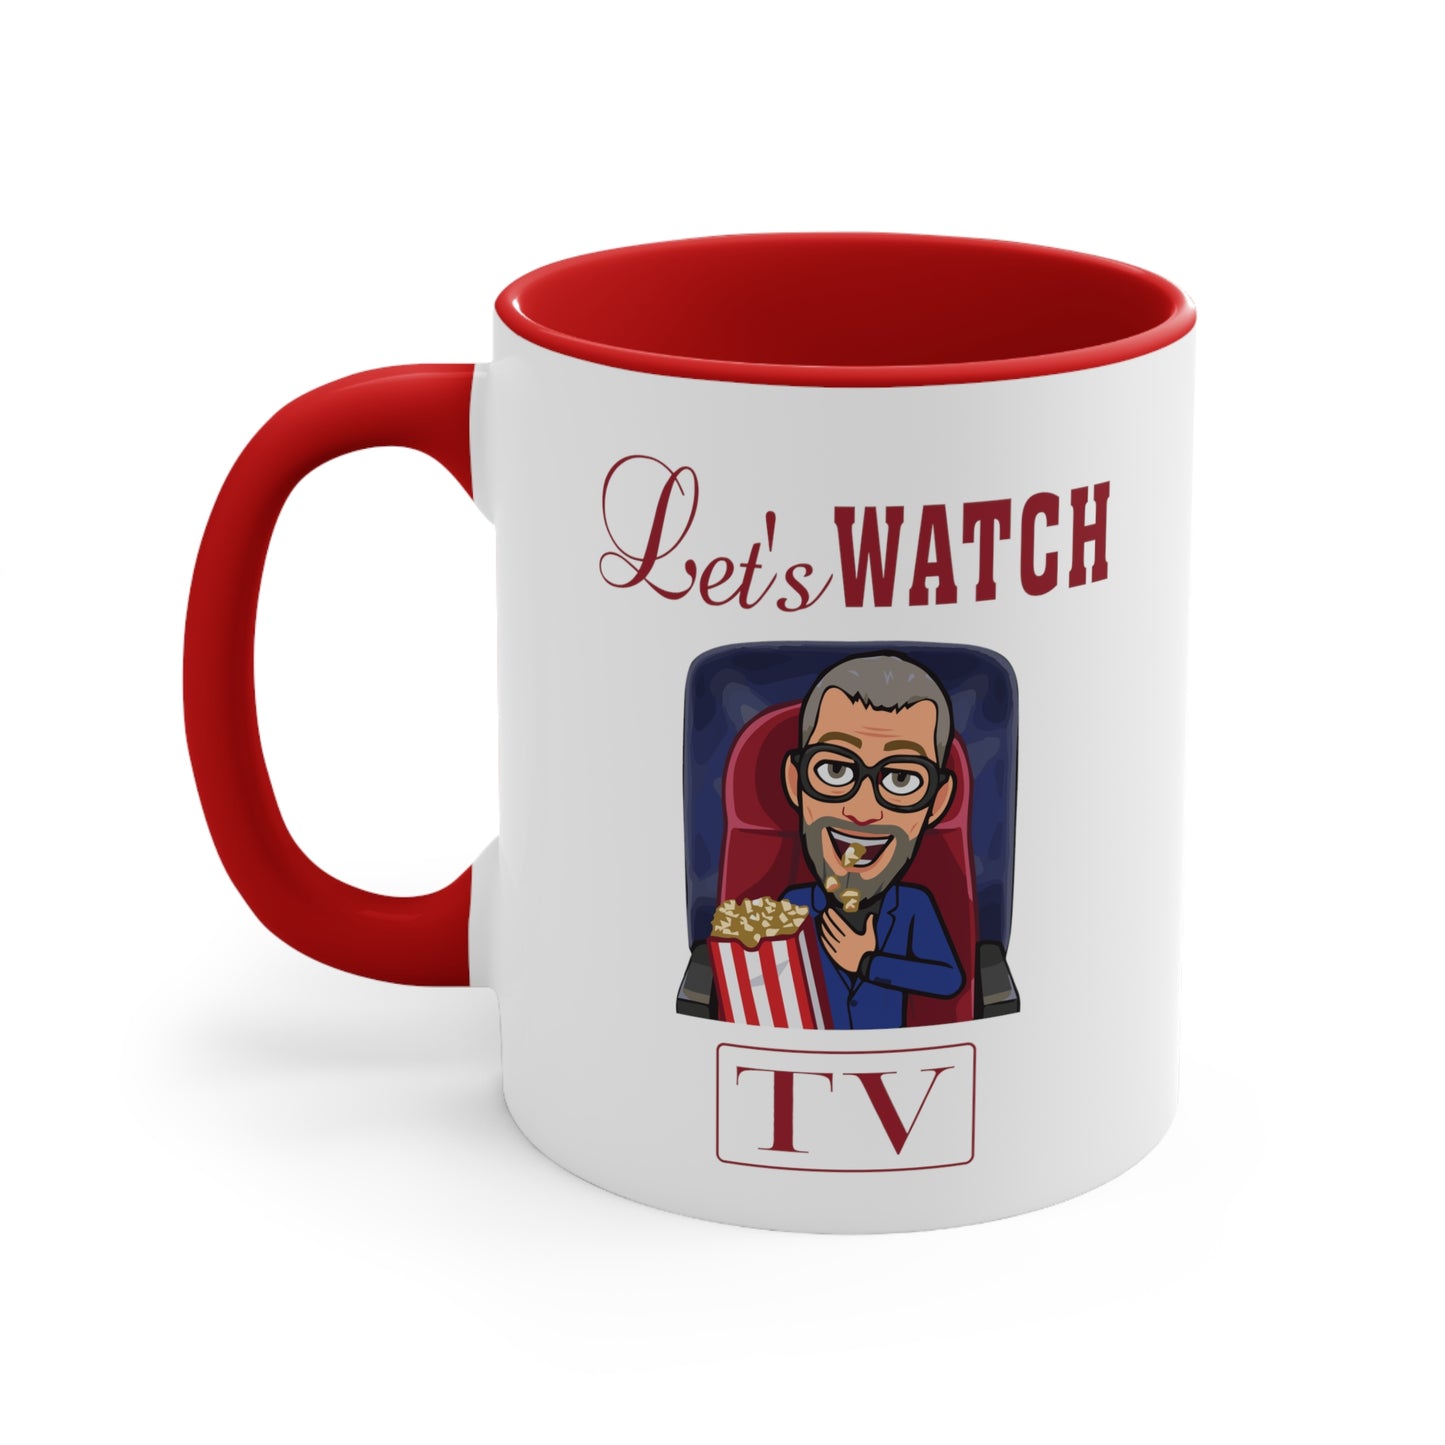 Jay Watch Let's Watch TV - Accent Coffee Mug, 11oz